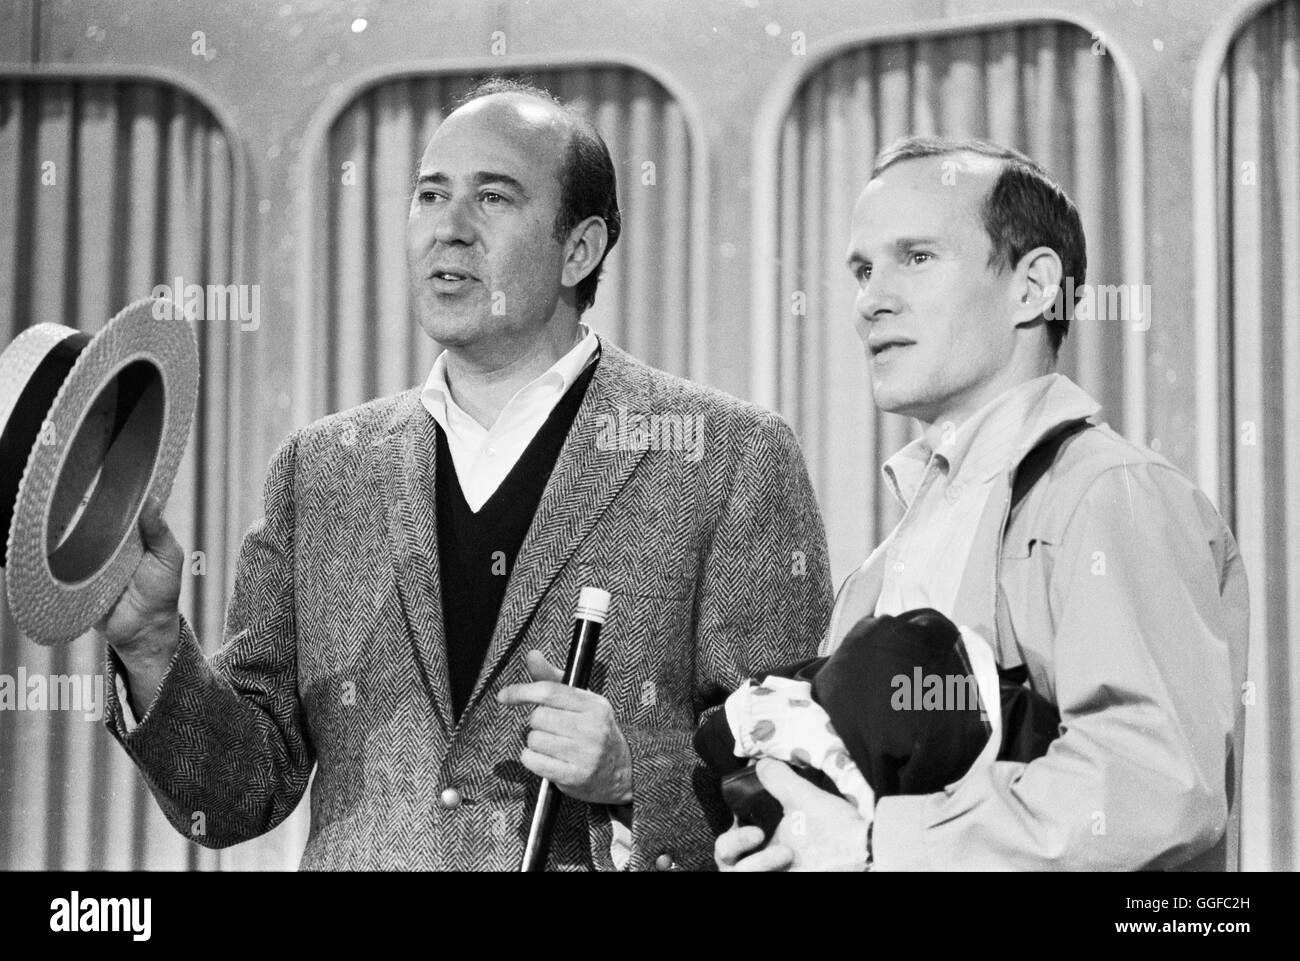 Tom Smothers and Carl Reiner on the Smothers Brothers Comedy Hour, rehearsing for Episode 5, which aired on March 5, 1967. Stock Photo